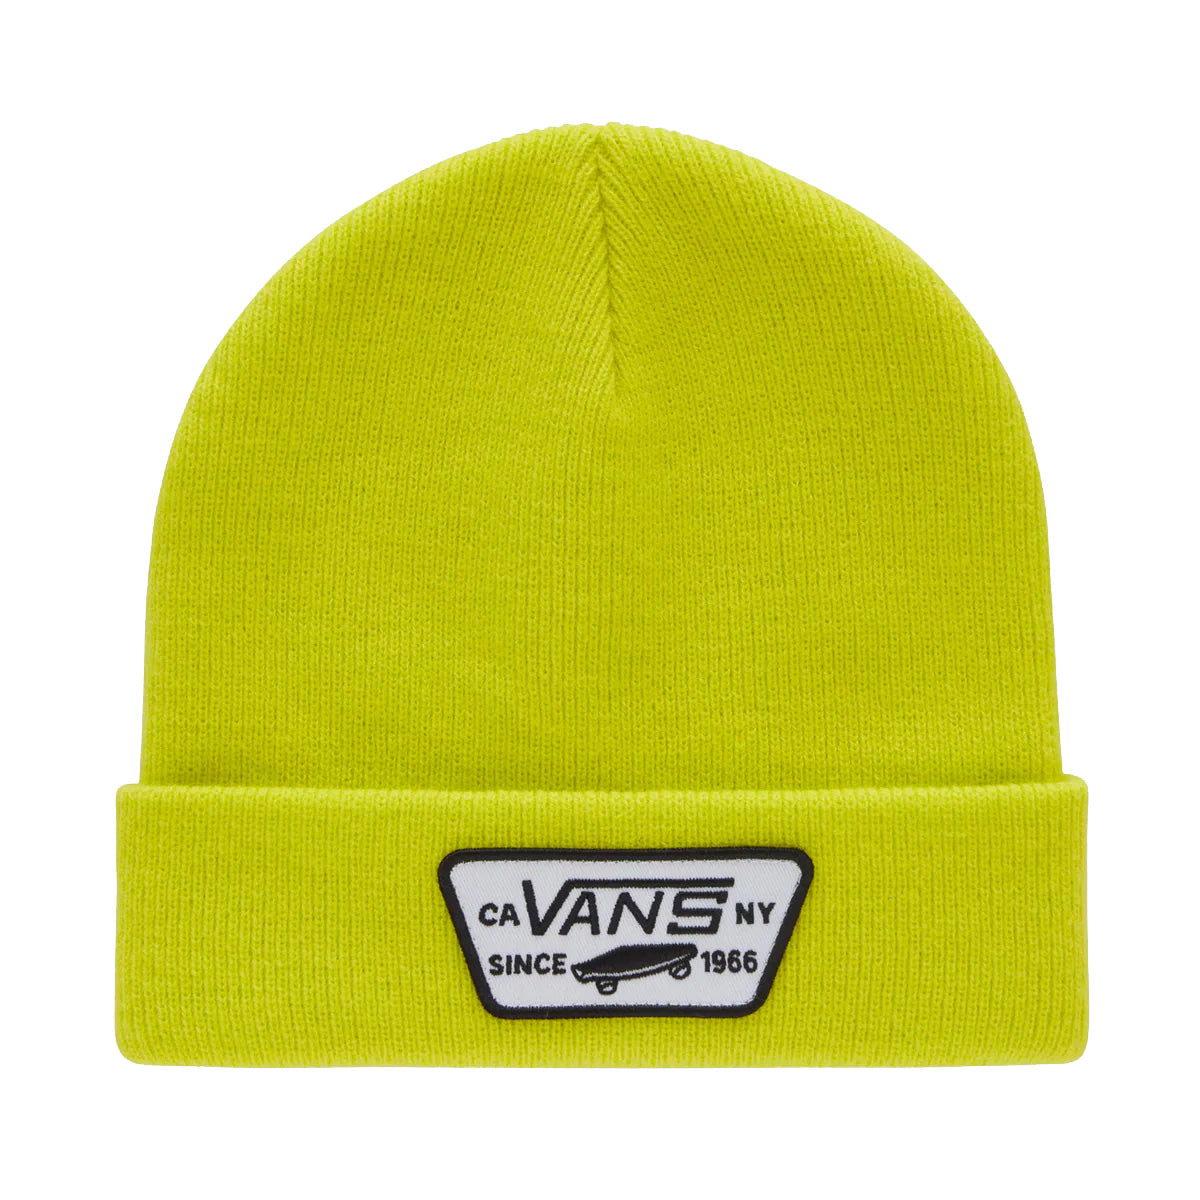 Neon yellow vans cuffed and ribbed beanie with black and white vans patch logo on front. Free uk shipping over £50